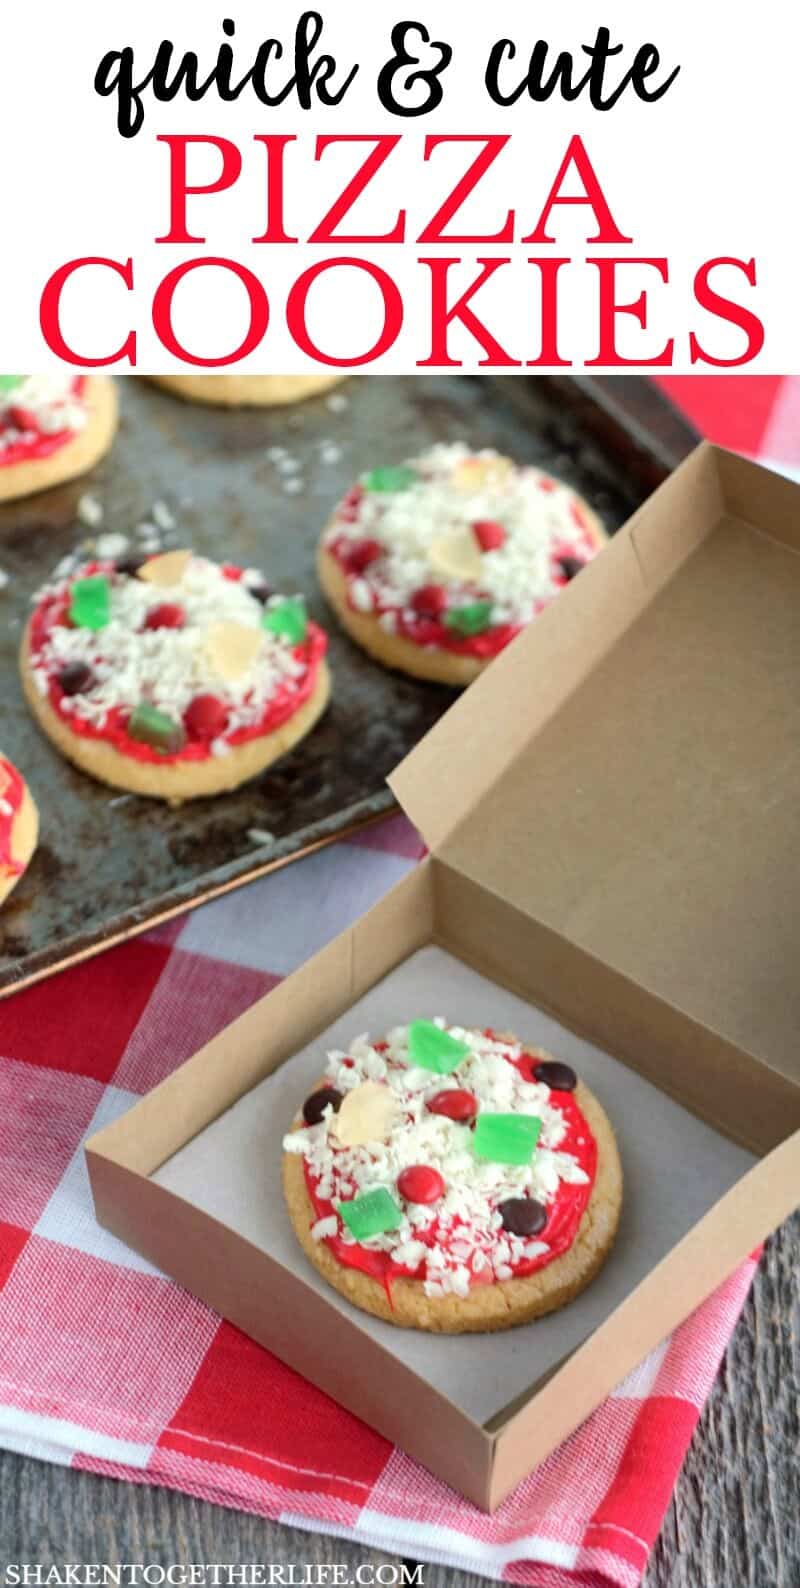 Having a pizza party? Need a simple pizza themed dessert? Make these Quick & Cute NO BAKE Pizza Cookies!